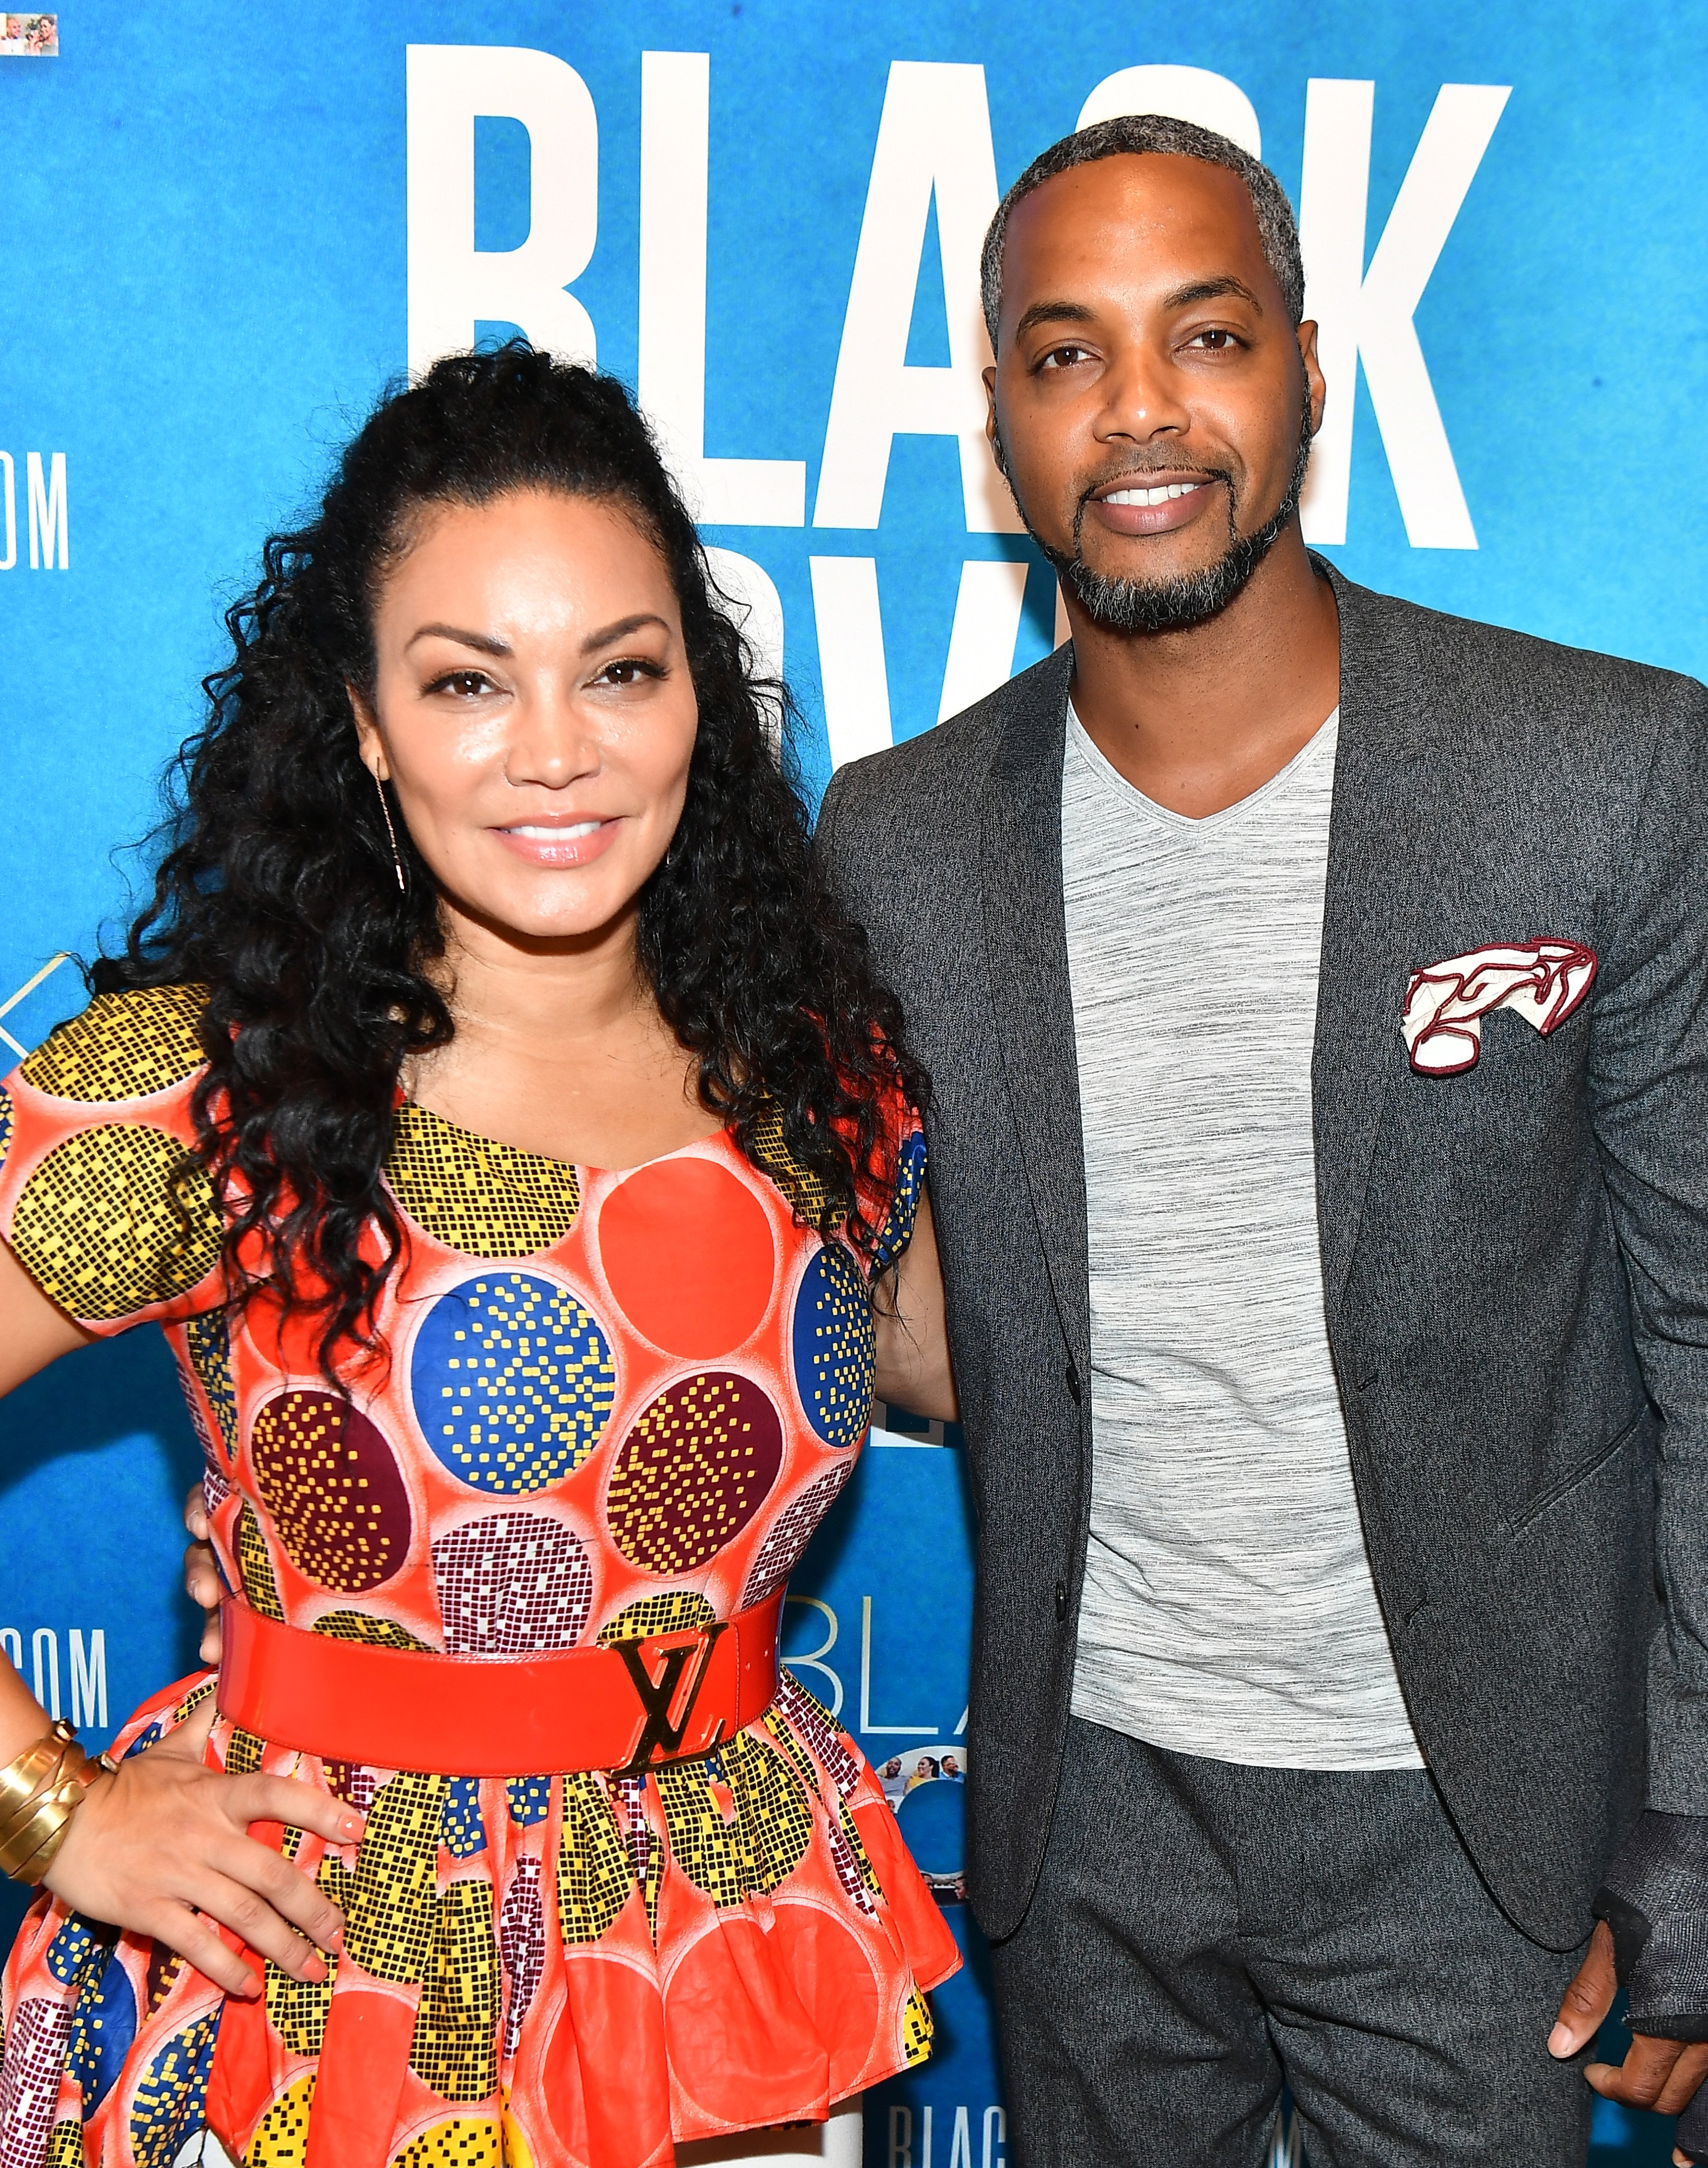 Egypt Sherrod and DJ Fadelf attend 2019 Black Love Summit at Mason Fine Art Gallery on July 20, 2019 in Atlanta, Georgia. | Photo by Paras Griffin/Getty Images